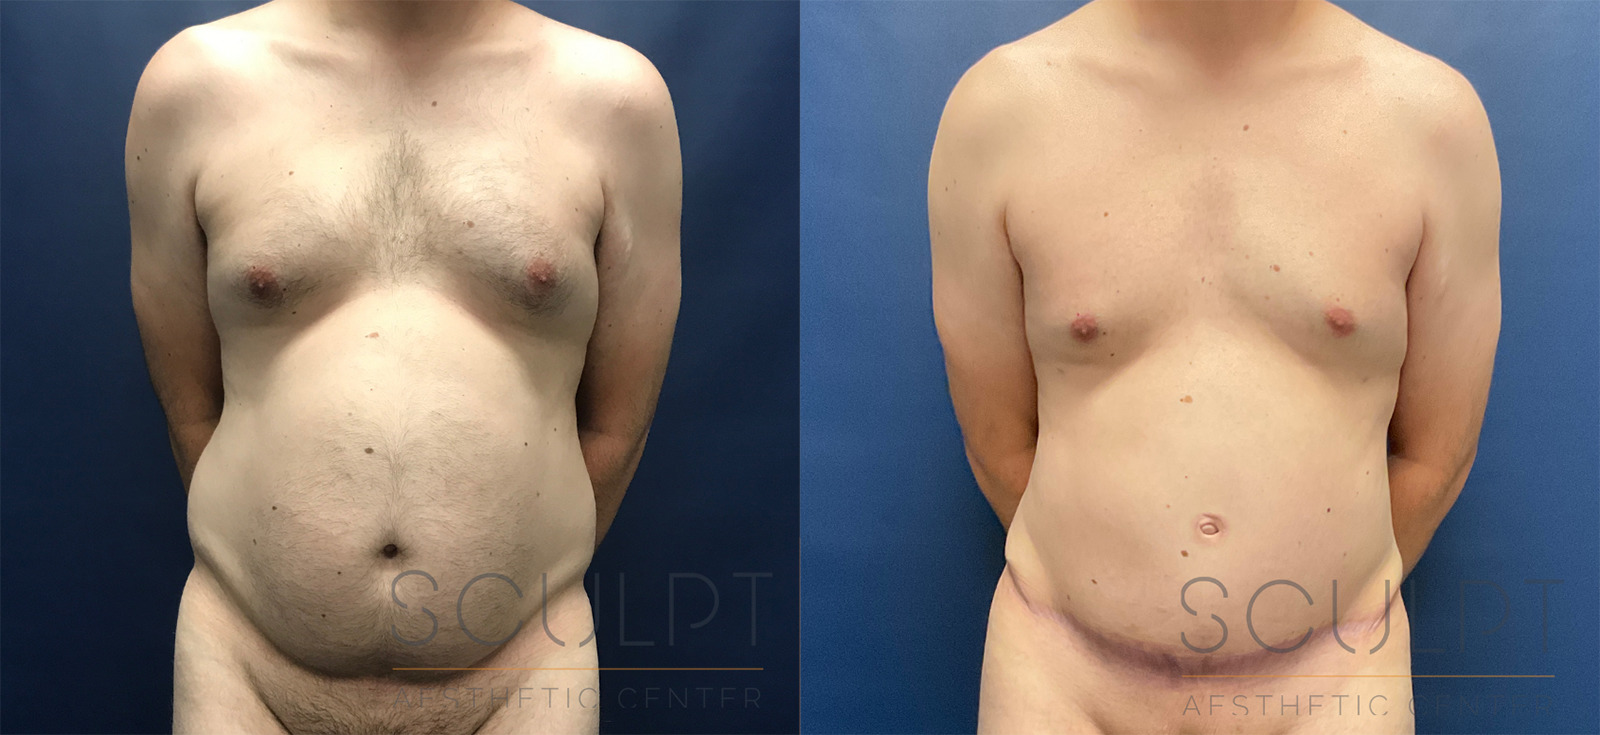 Male Tummy Tuck Before and After Photo by Sculpt Aesthetic Center in Frisco, TX